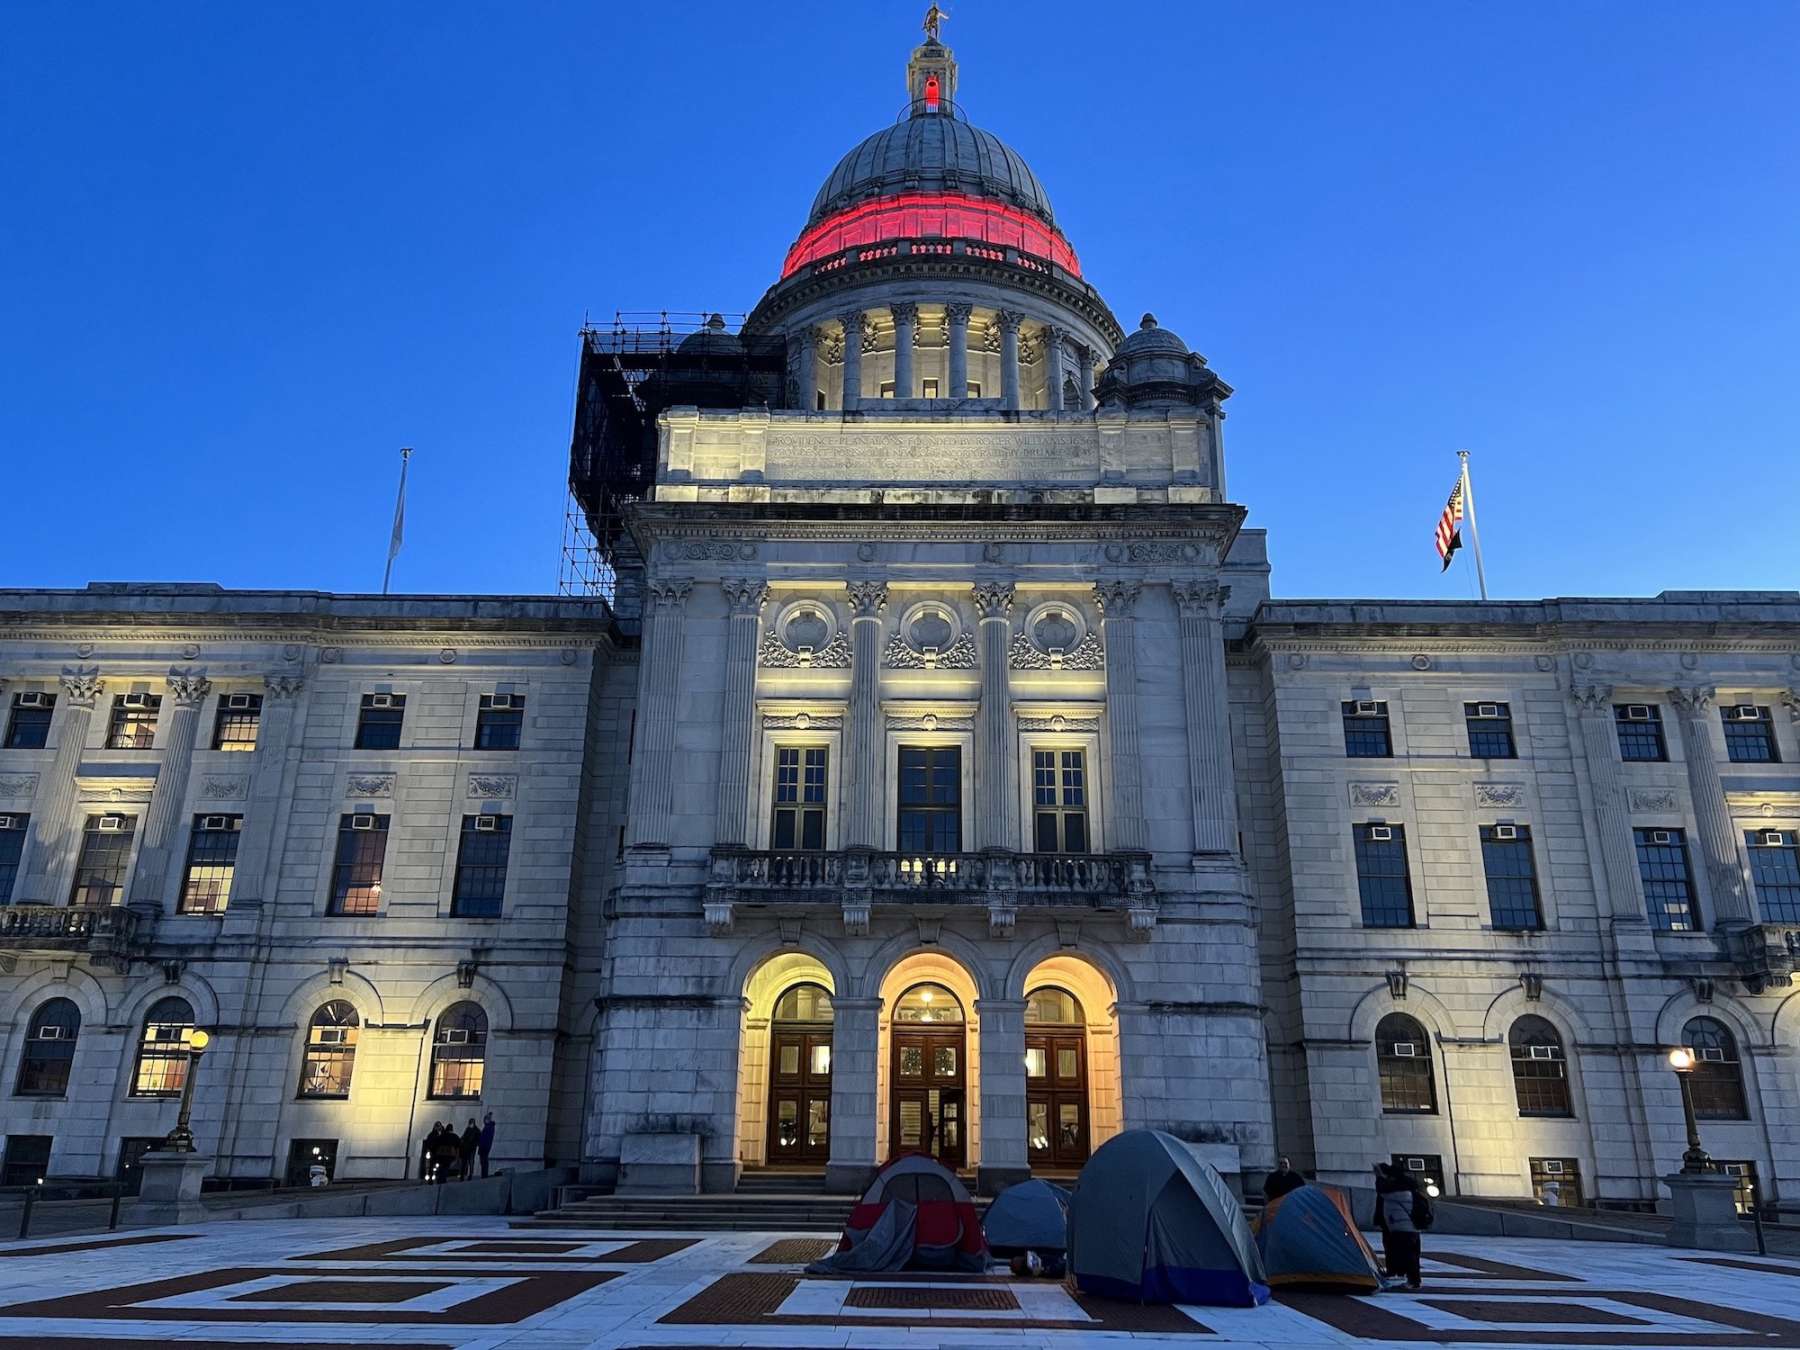 Rhode Island News: Senator Mendes holds rally ahead of second night outside RI State House